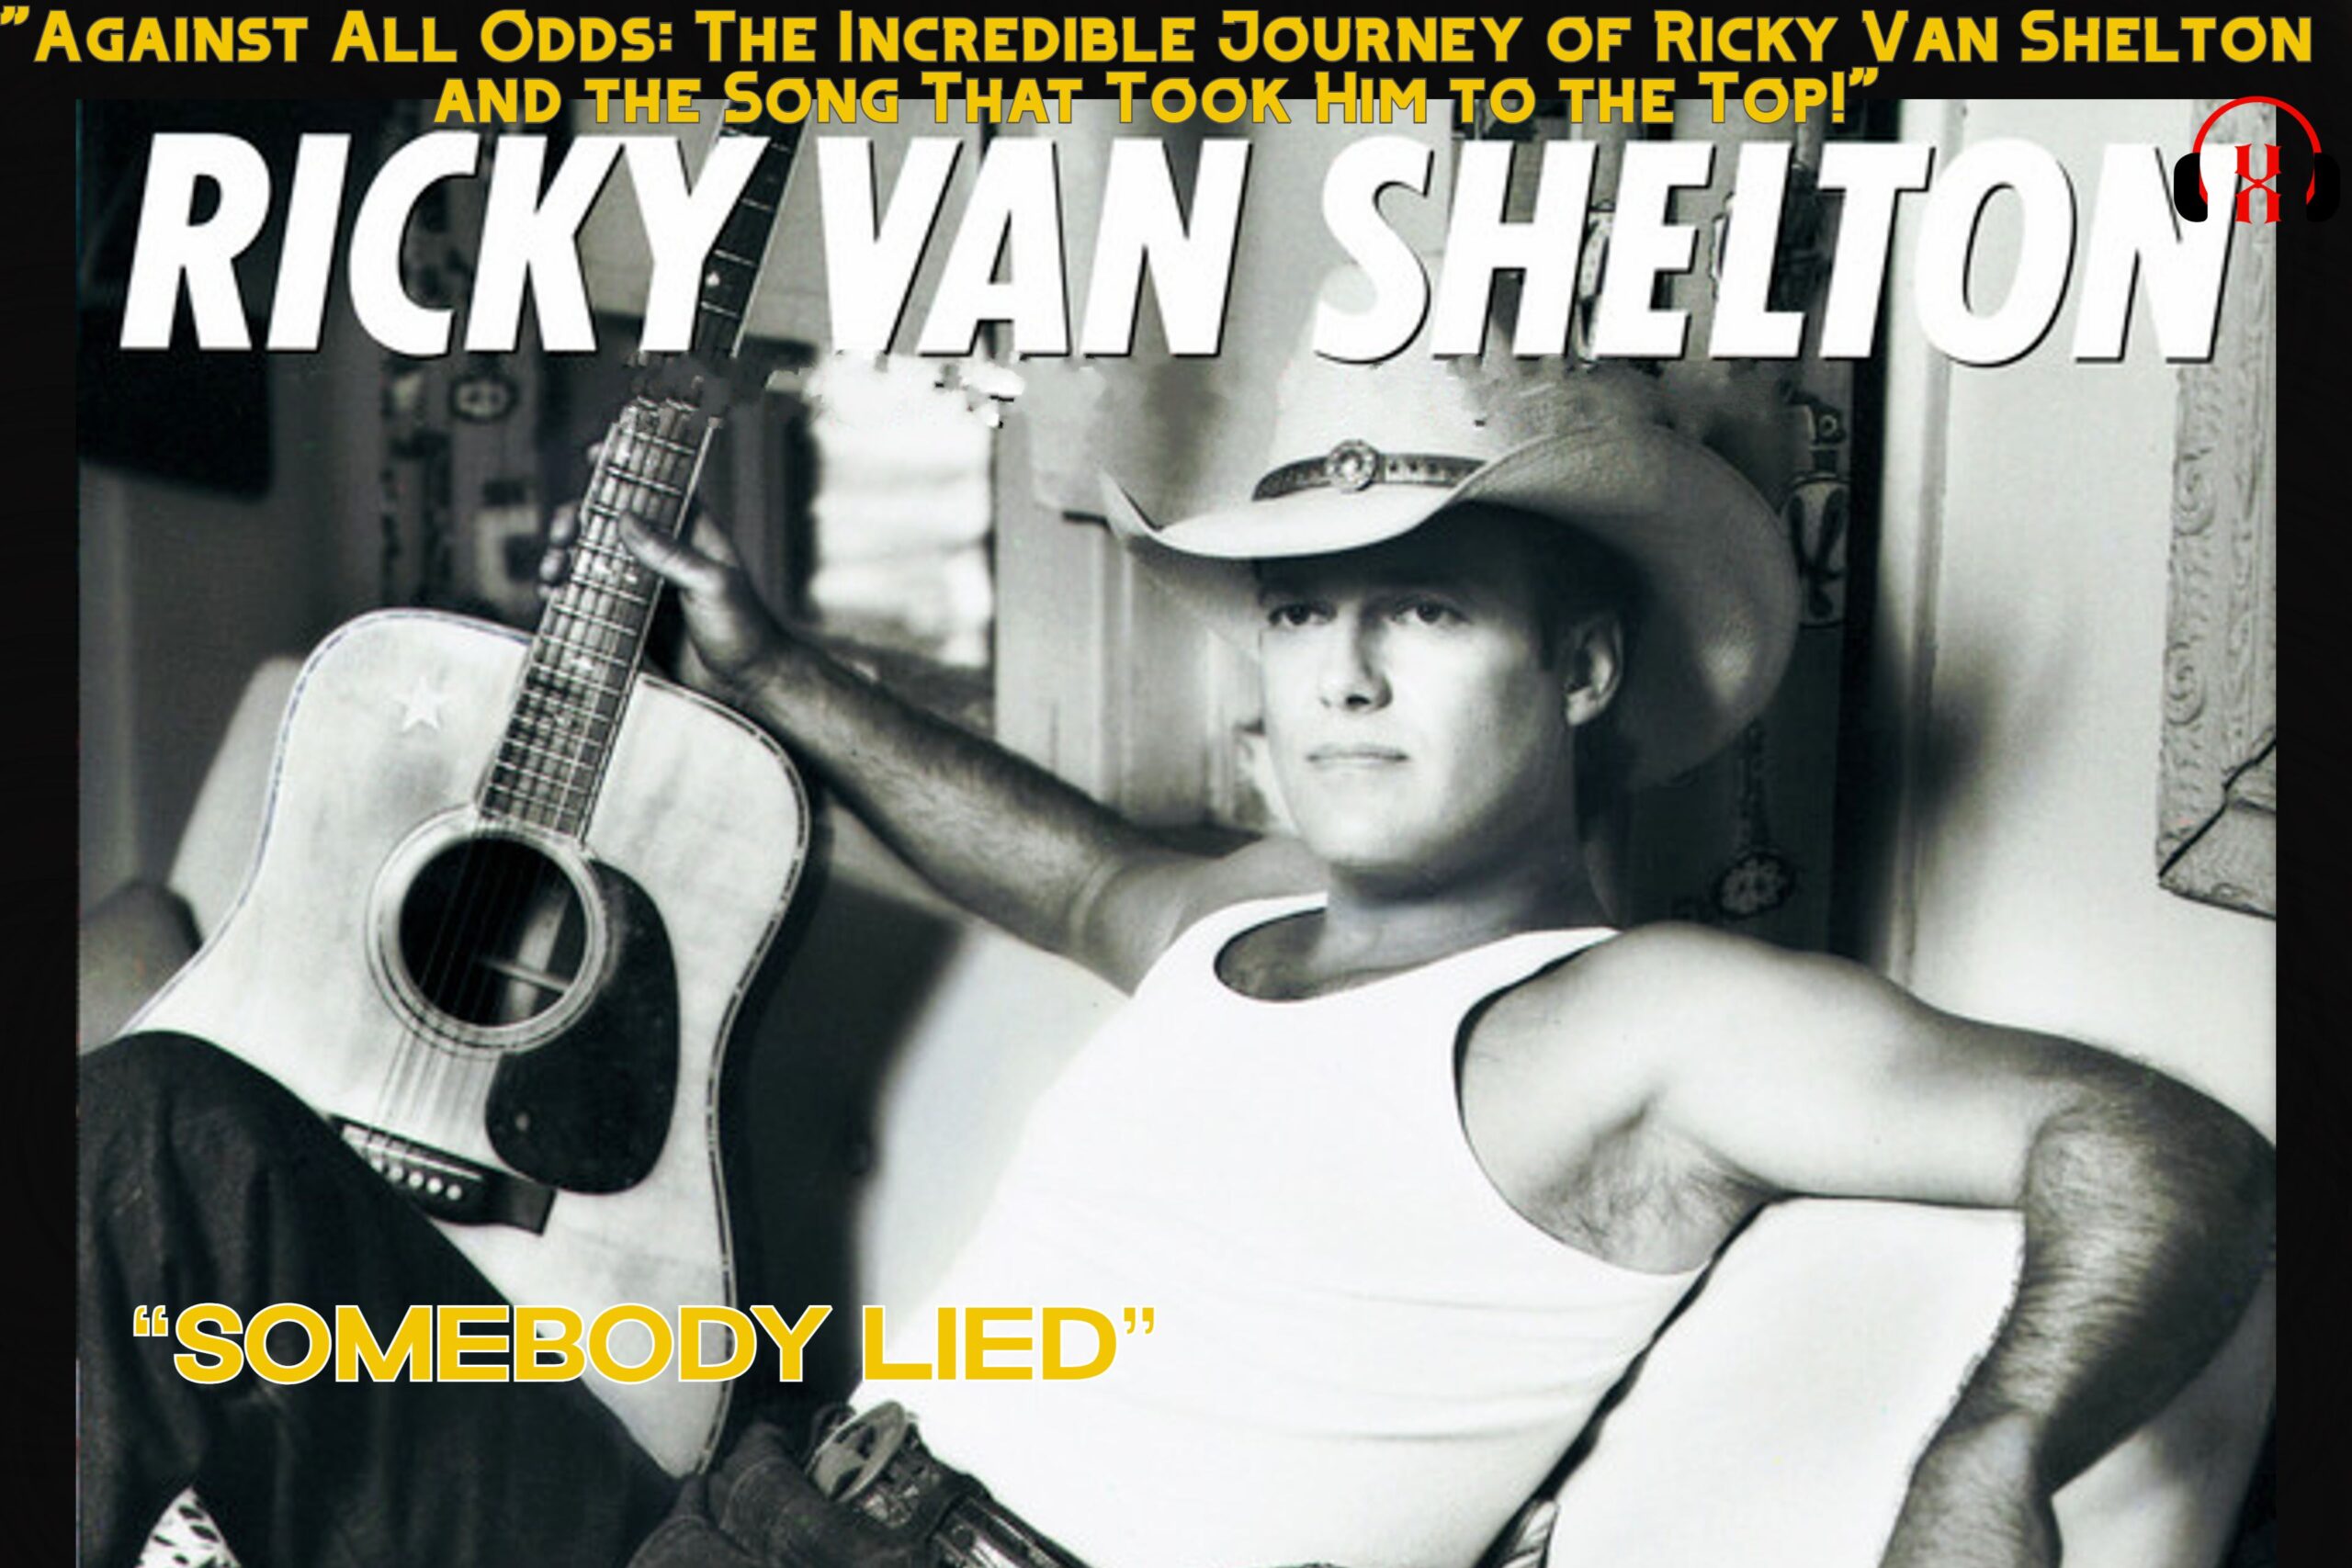 “Against All Odds: The Incredible Journey of Ricky Van Shelton and the Song That Took Him to the Top!”